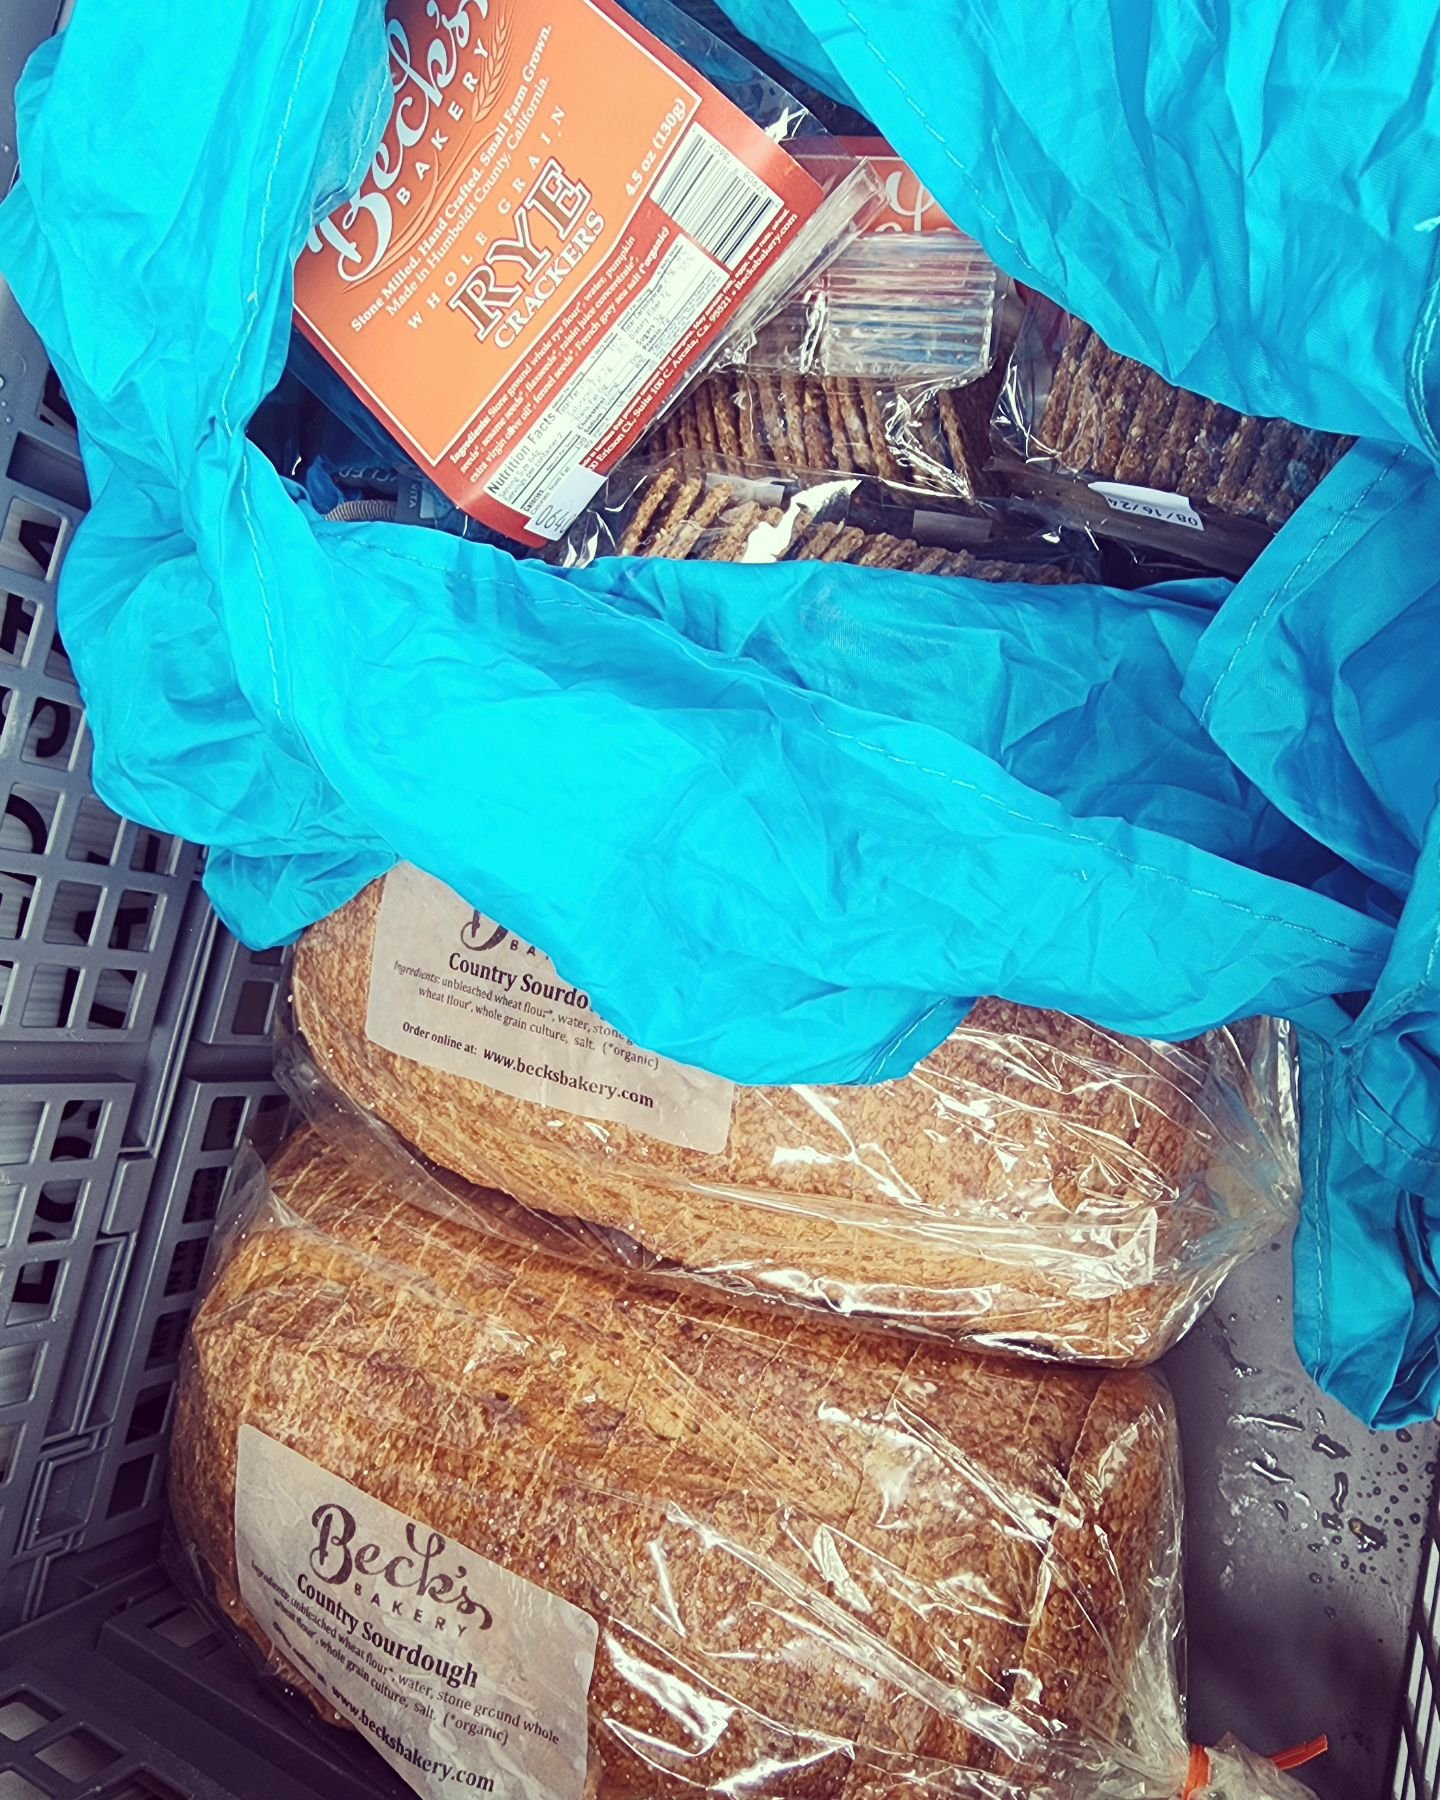 Picked up the final tasty goodies for this evening -- crackers, cookies, and sliced sourdough from @becksbakery, to go with the @cypressgrovers cheese, @dicktaylorchocolate that benefits our fellow DreamMaker project @hapihumboldt and their Eureka Ch